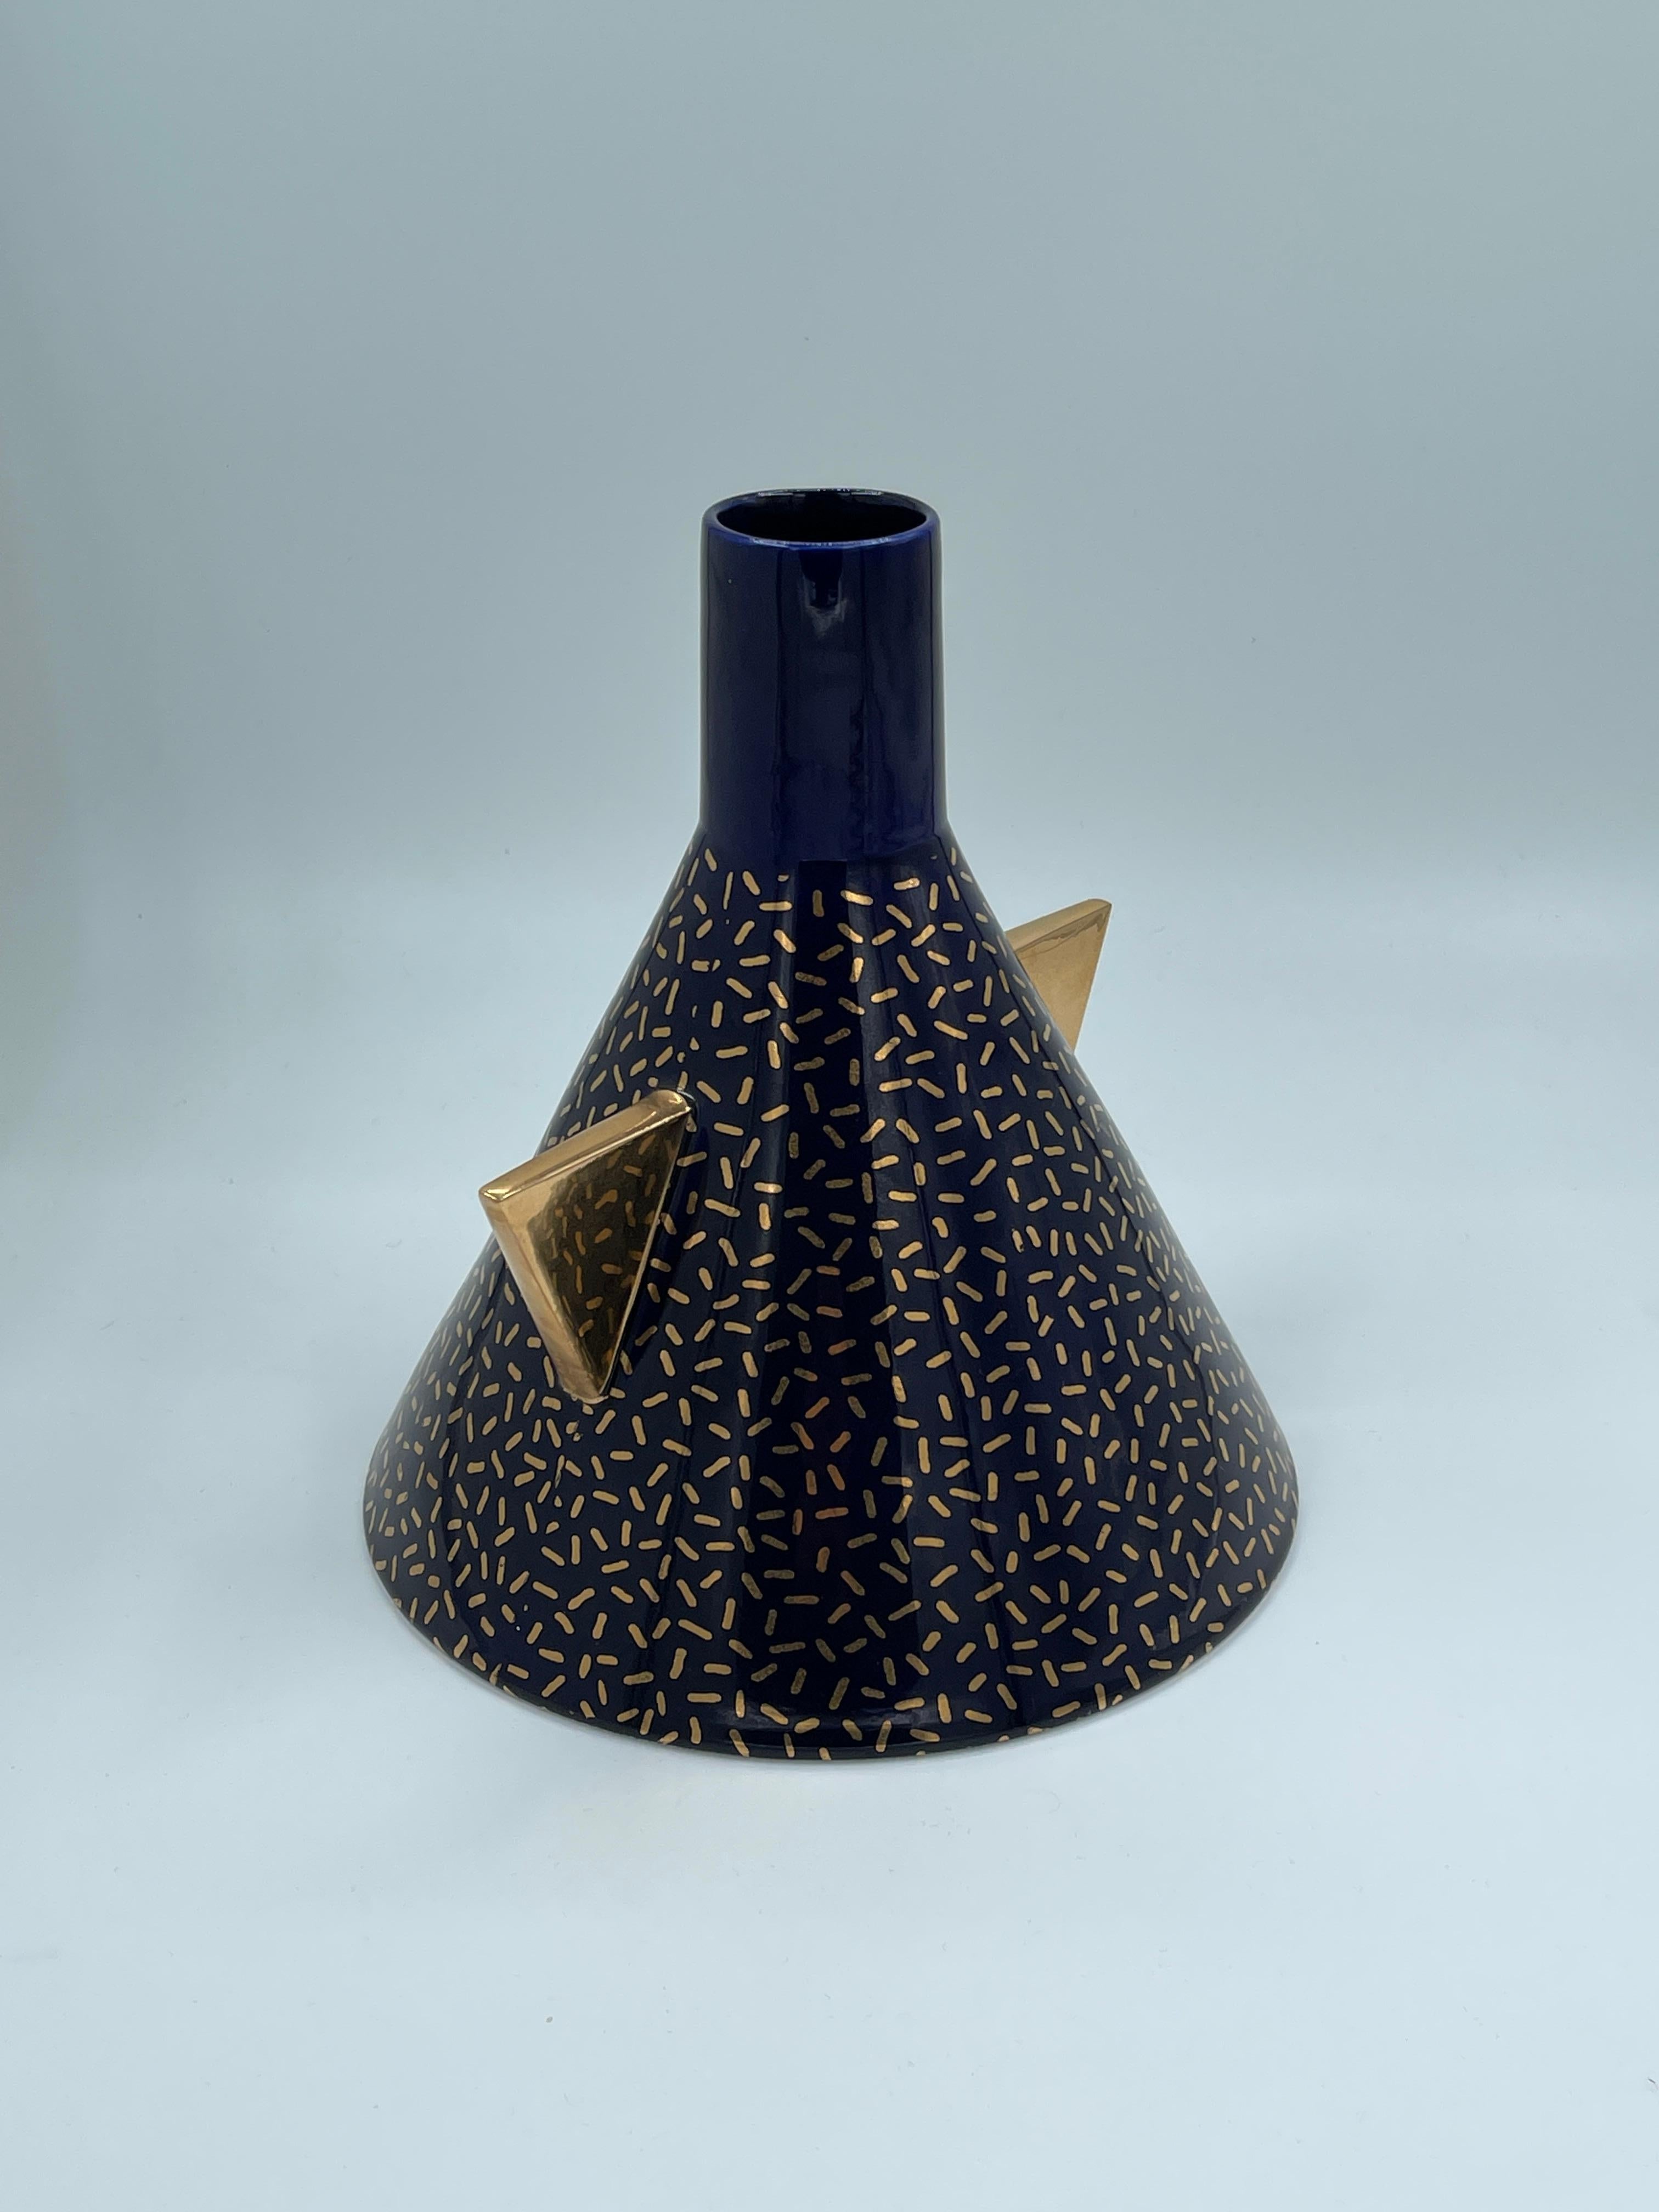 Hand-turned and hand-painted ceramic vase with kiln-sublimated decorative decals.

Teje vase for Memphis Milano by Matteo Thun, Italy, 1981. Very good condition with no chips cracks or repairs.

vase: 24 × 23 cm

Stamped manufacturer's mark to